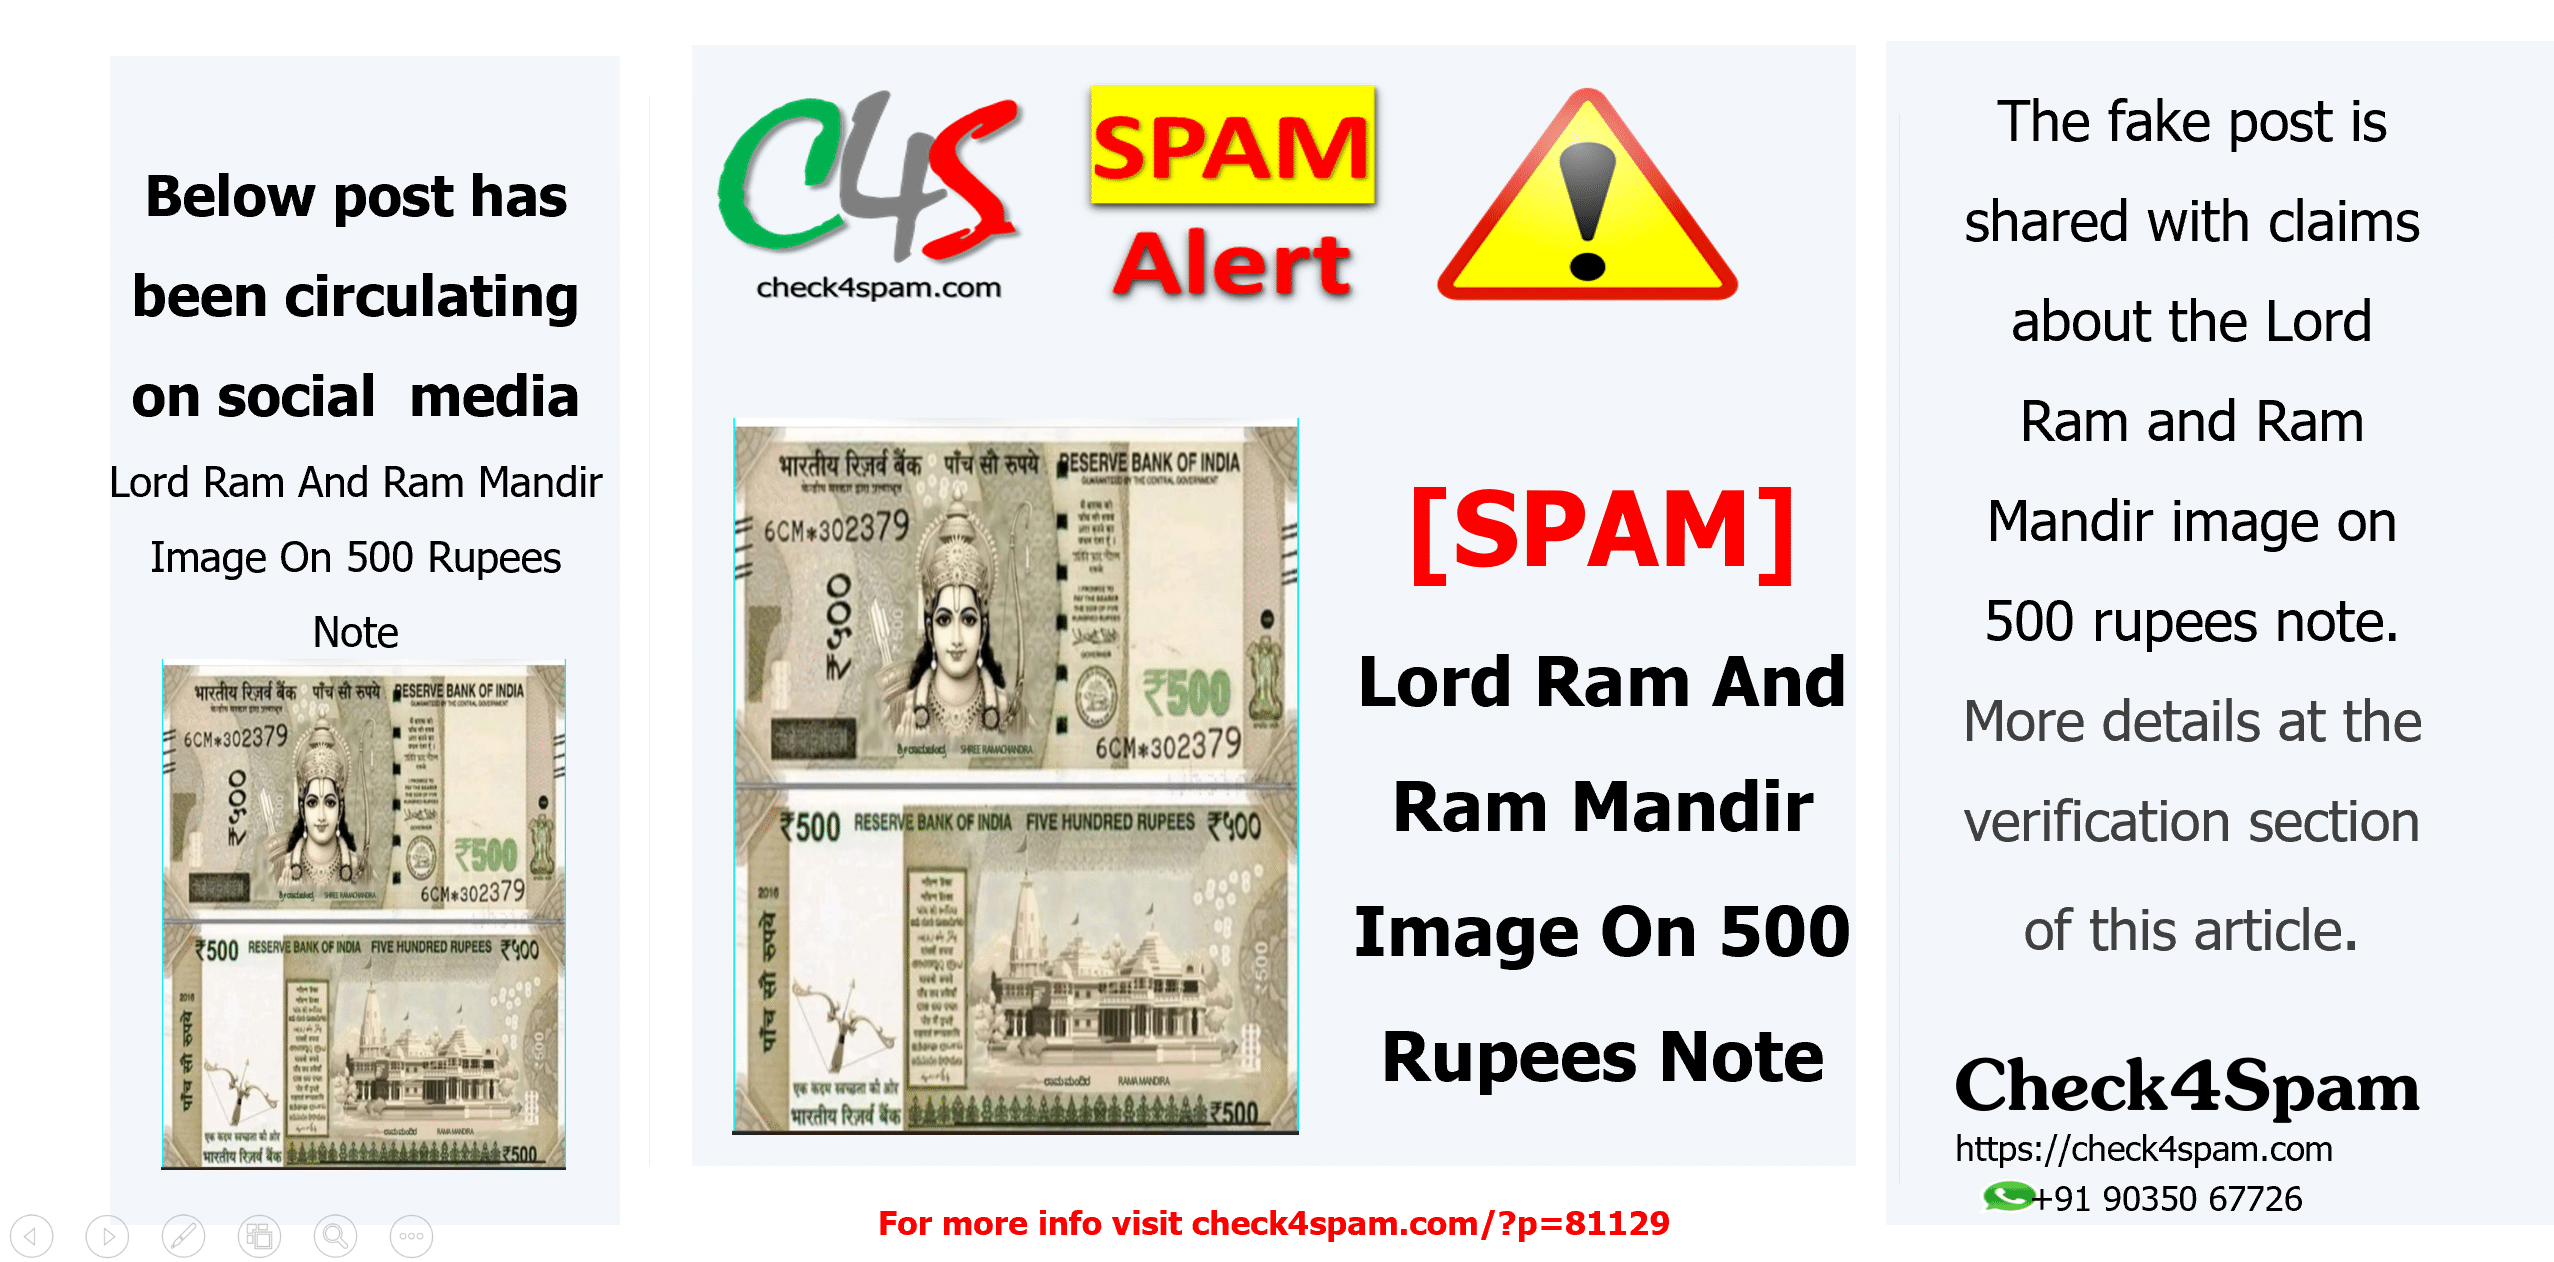 Lord Ram And Ram Mandir Image On 500 Rupees Note